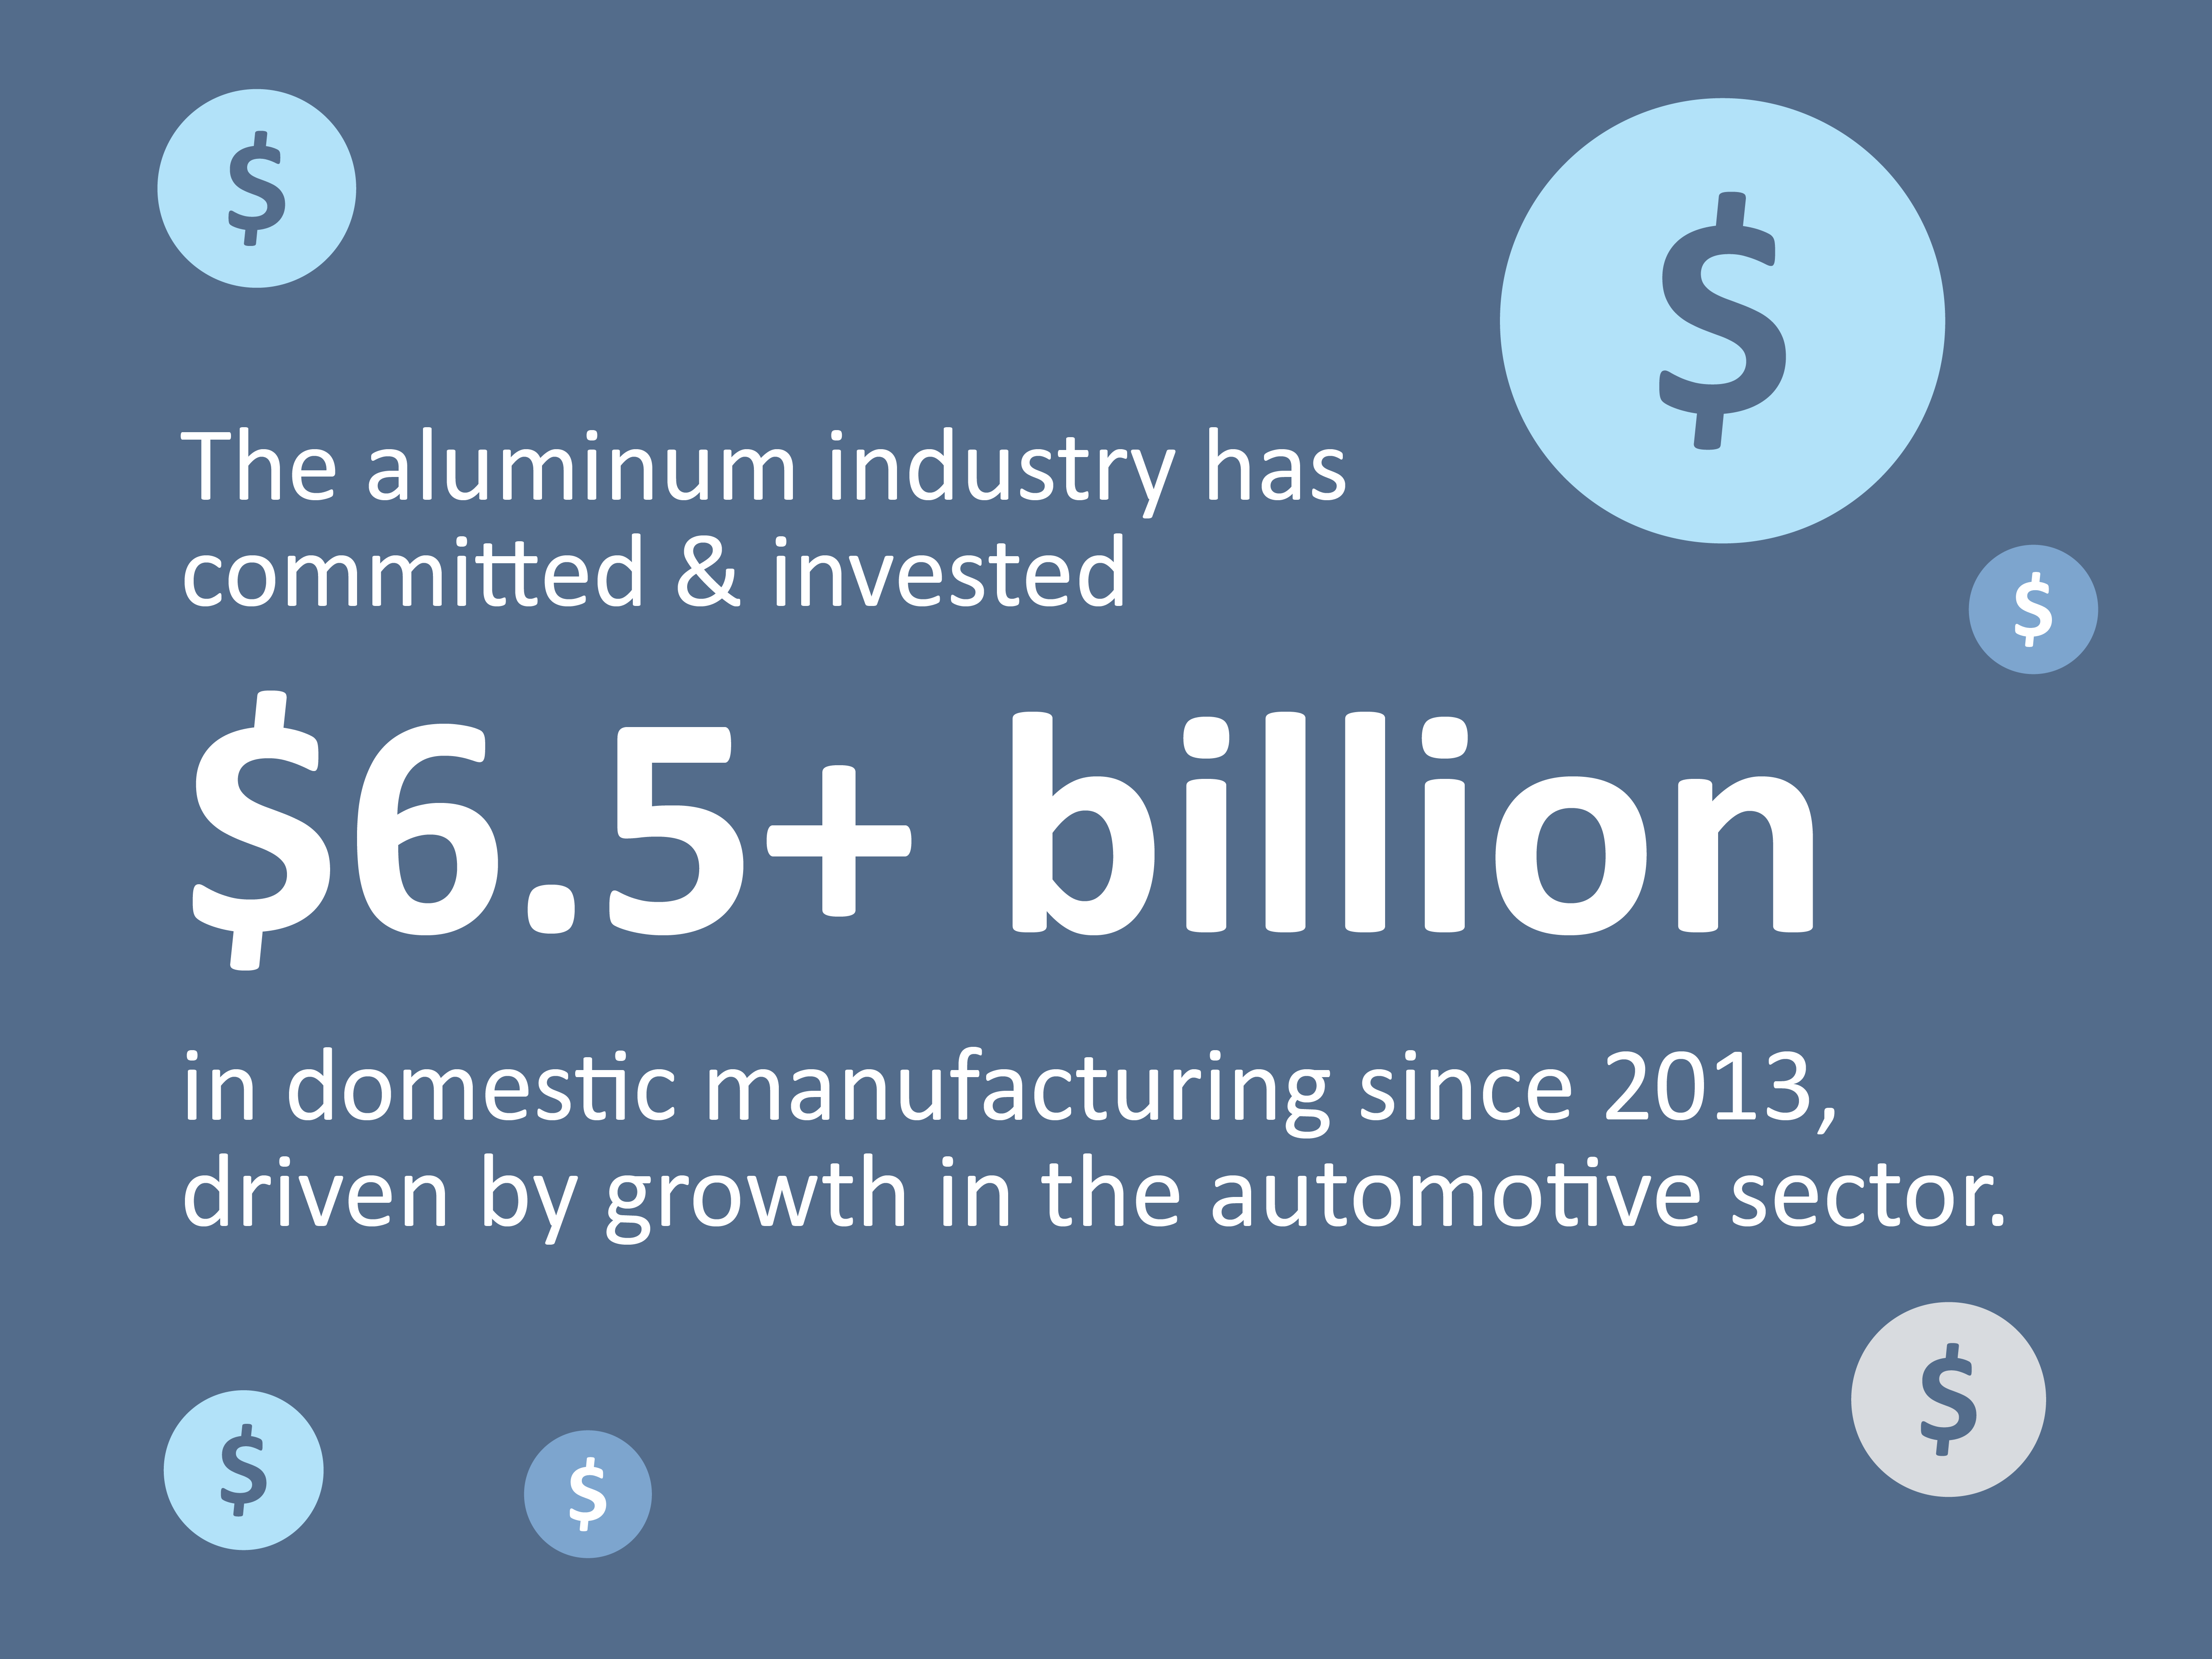 The aluminum industry has committed & invested more than $6.5 billion in domestic manufacturing since 2013, driven by growth in the automotive sector.